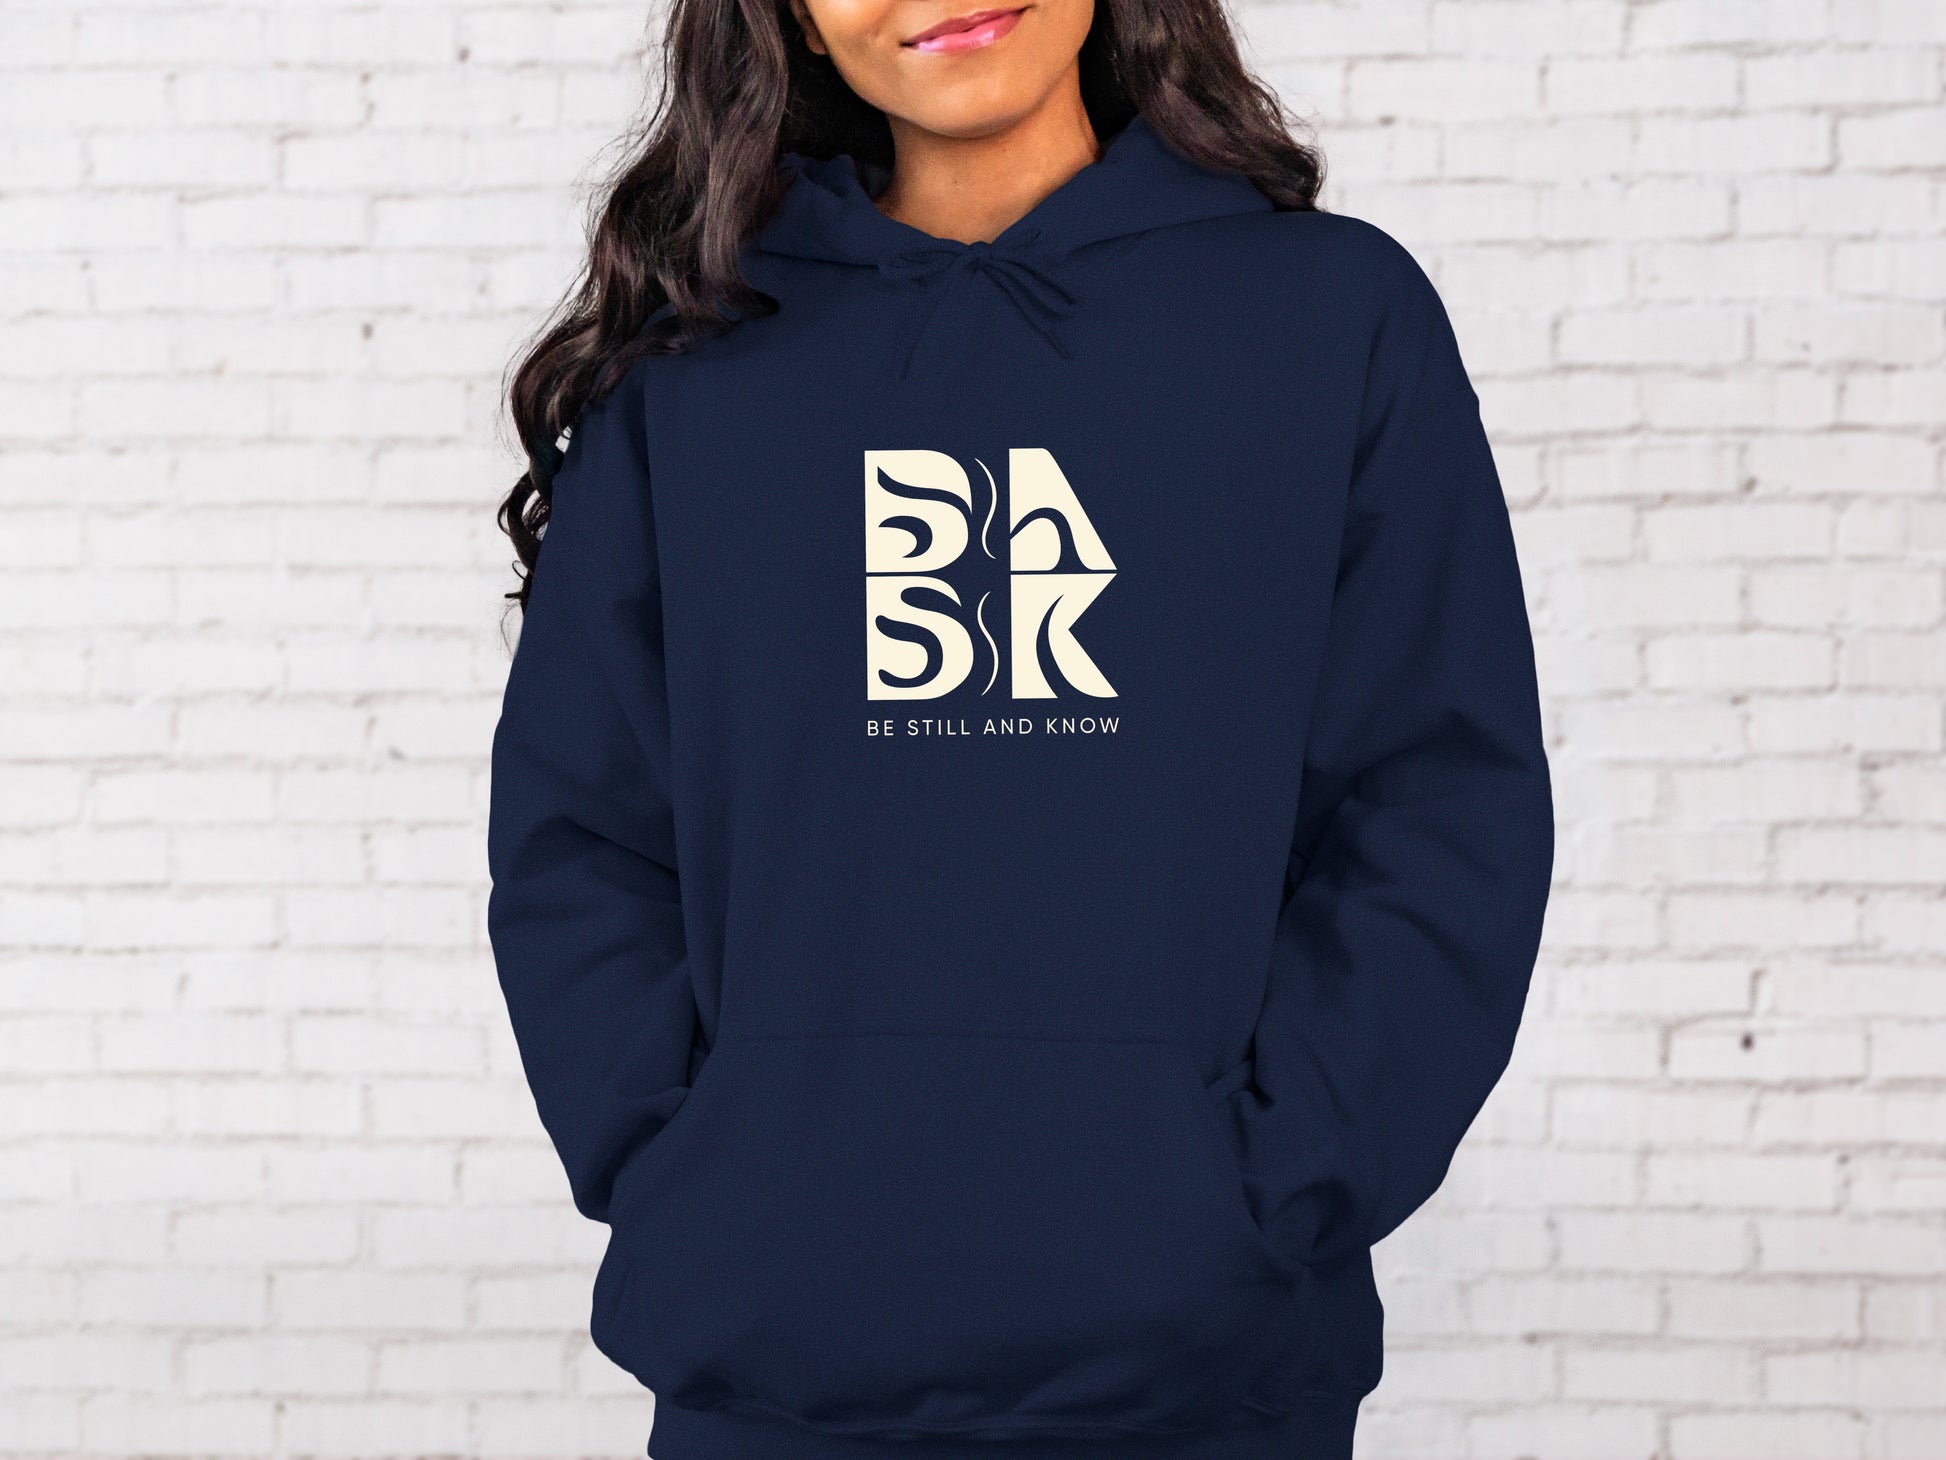 A woman wearing a navy hoodie with the words "Blessed Beginnings Hoodie In Navy" on it, representing Christian Apparel by Be Still and Know.